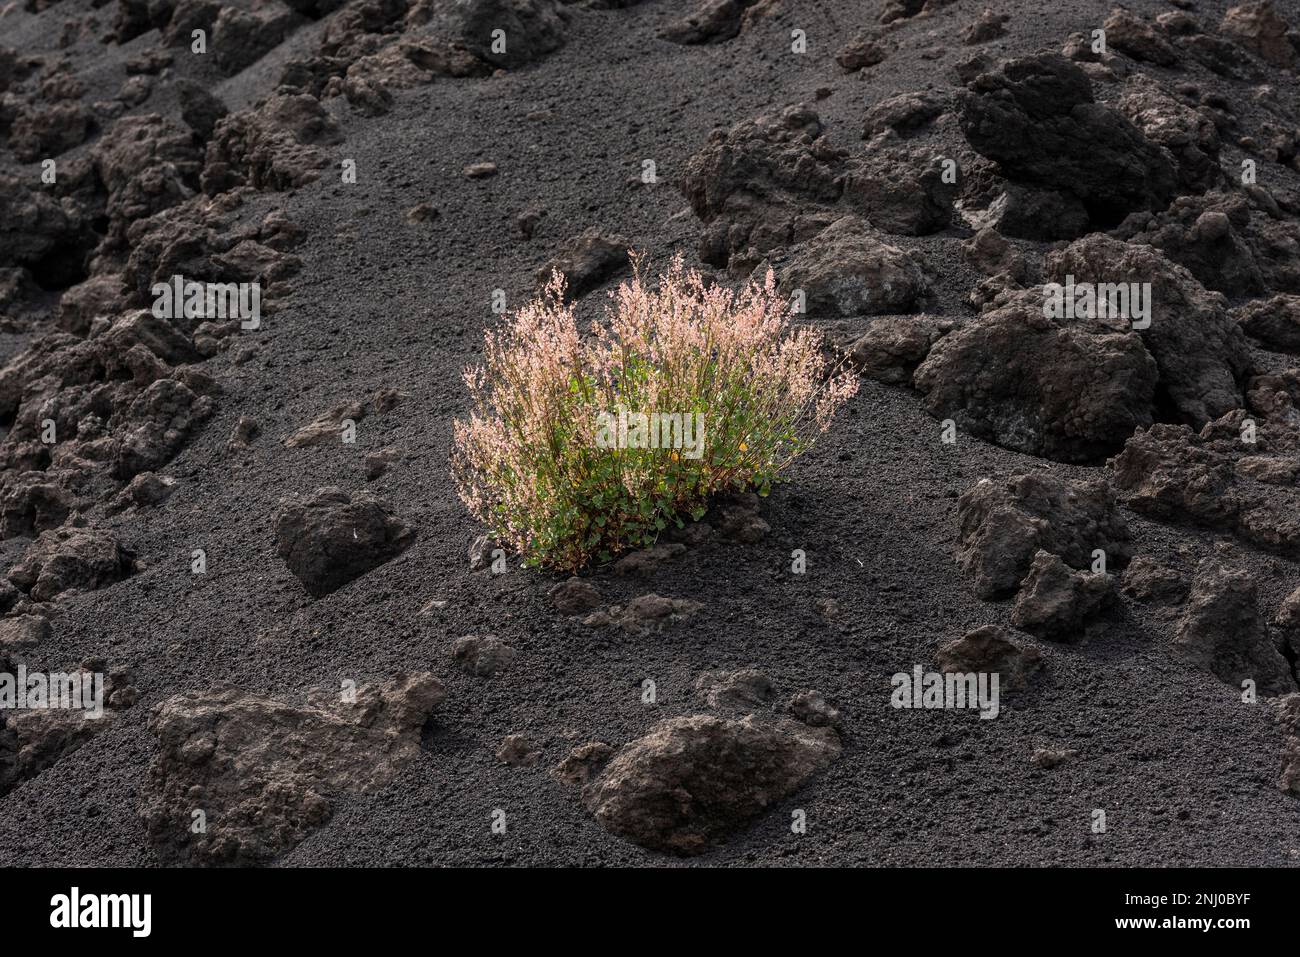 Mount Etna Sorrel (Rumex scutatus aetnensis) flowering on volcanic ash and solidified lava in the Valle del Bove, high on the famous Sicilian volcano Stock Photo